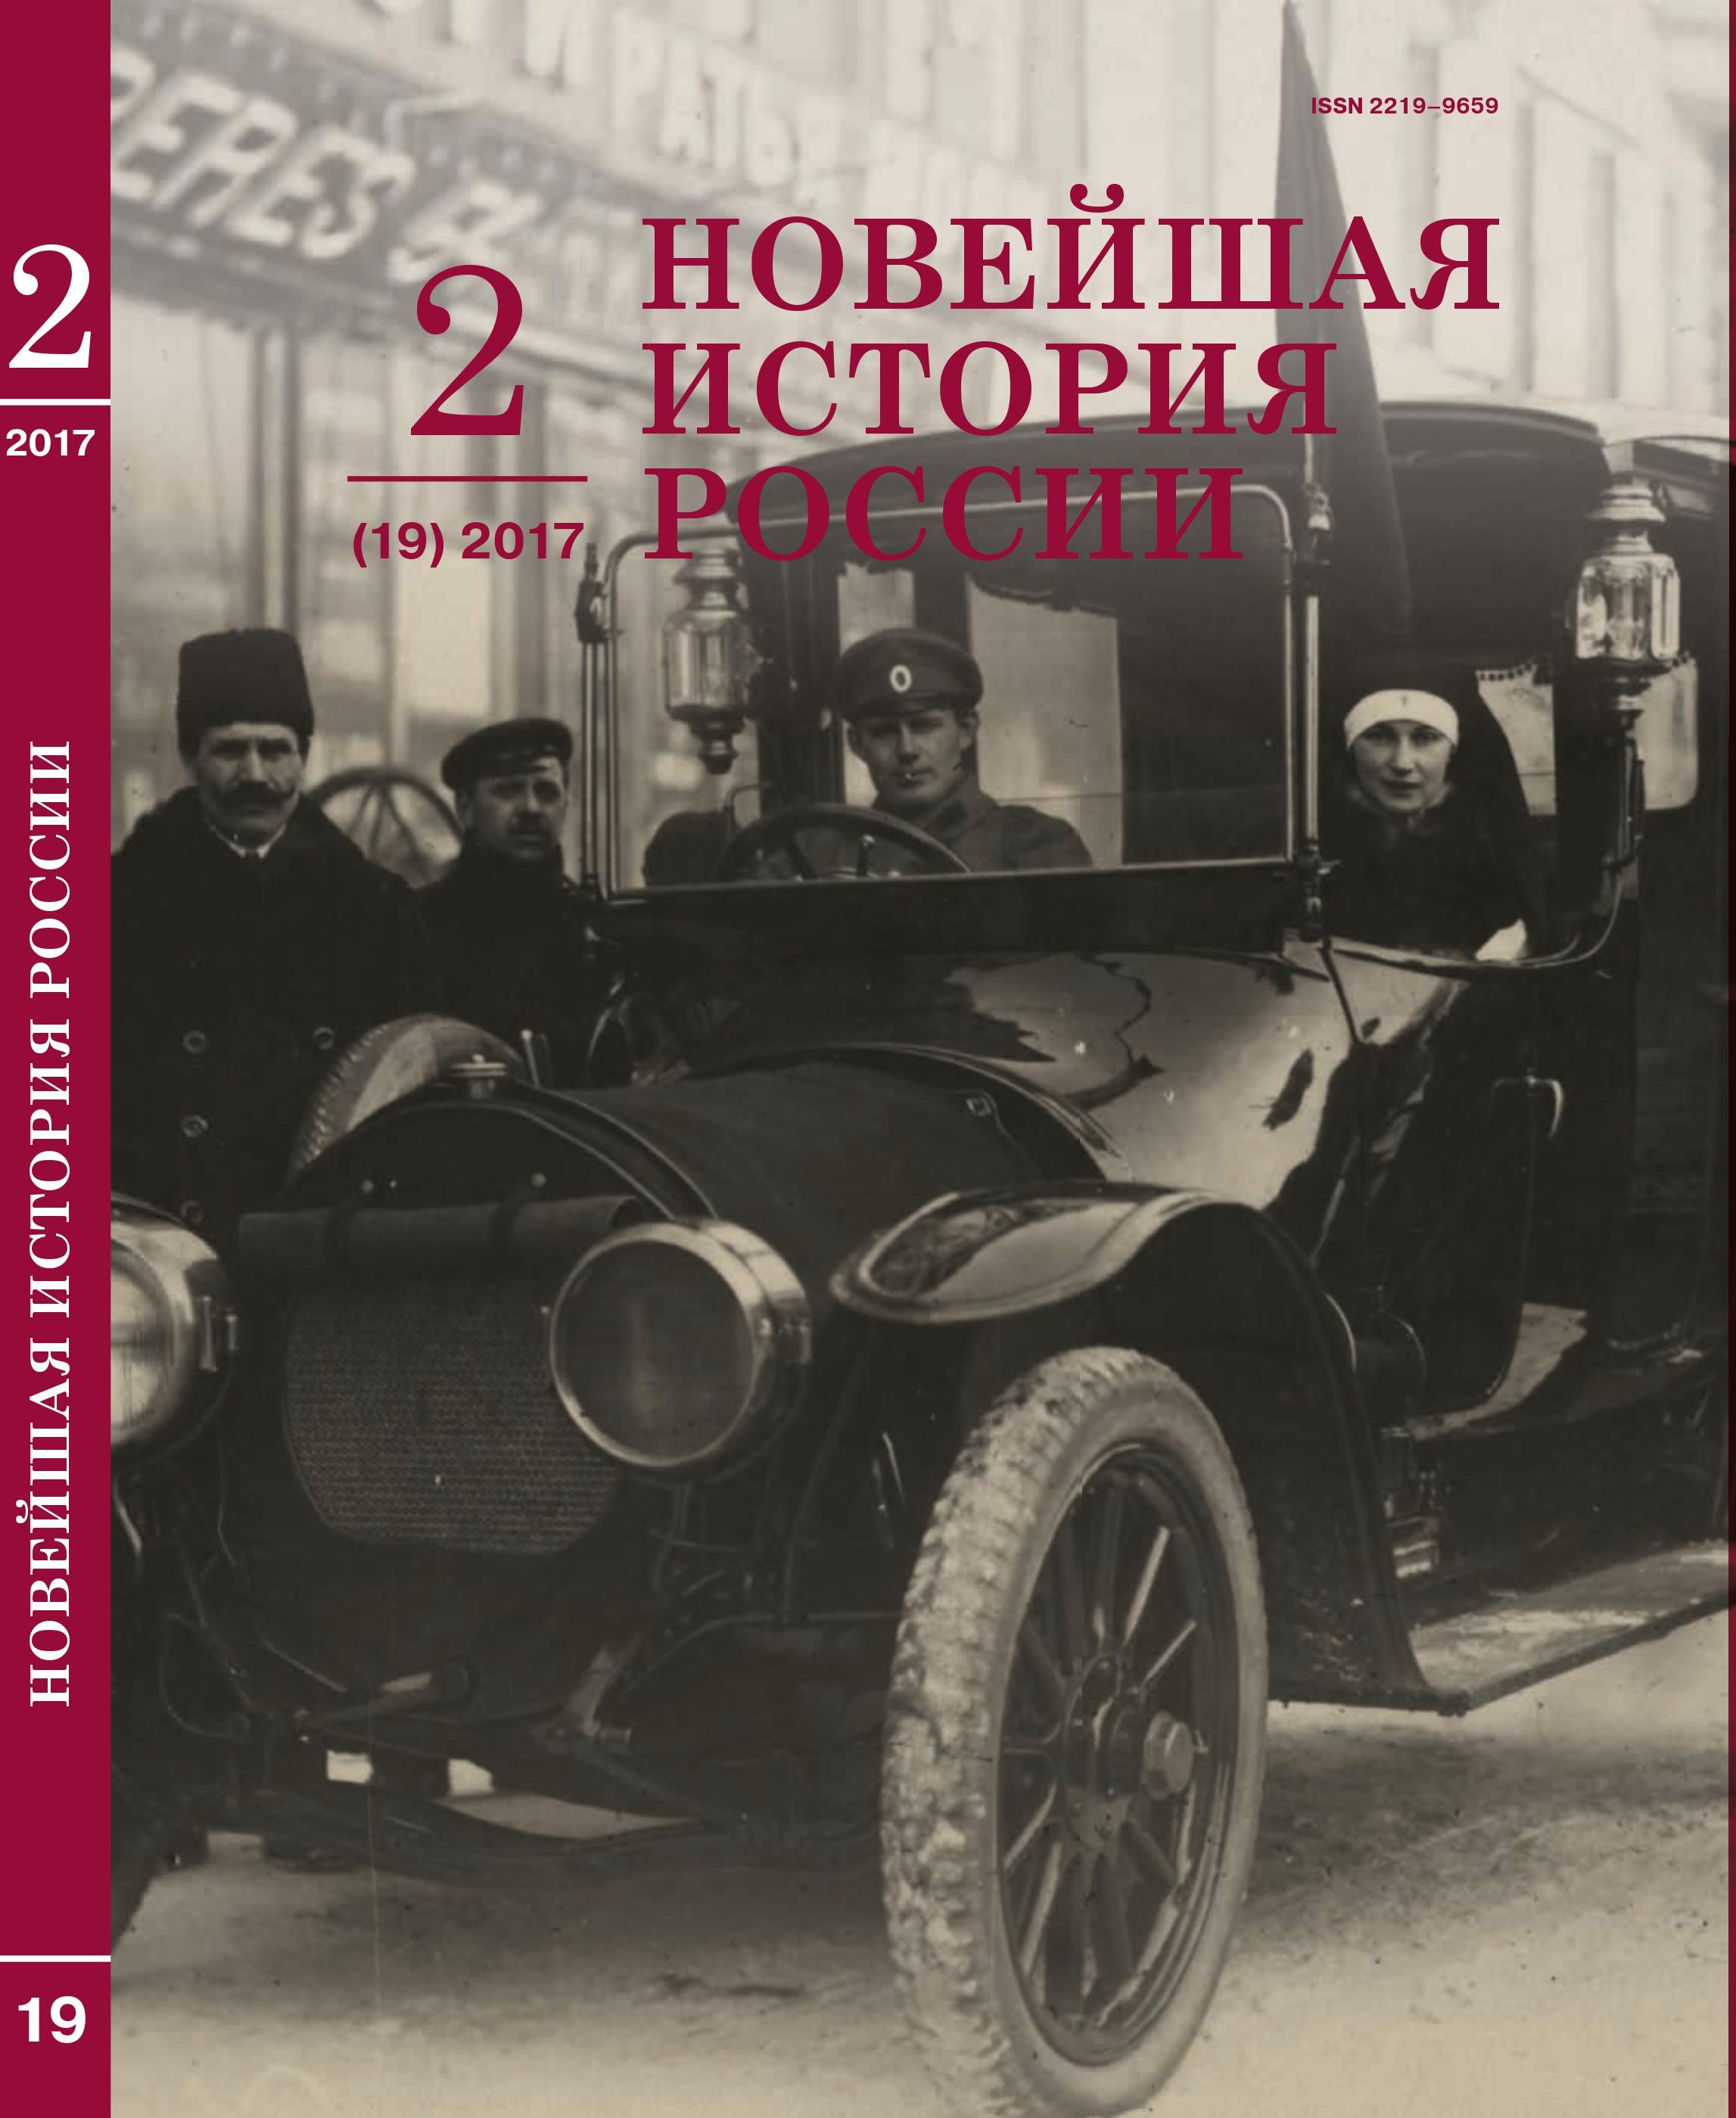 The All-Russian People’s State Party of V. M. Purishkevich: Program, Structure and Press Cover Image